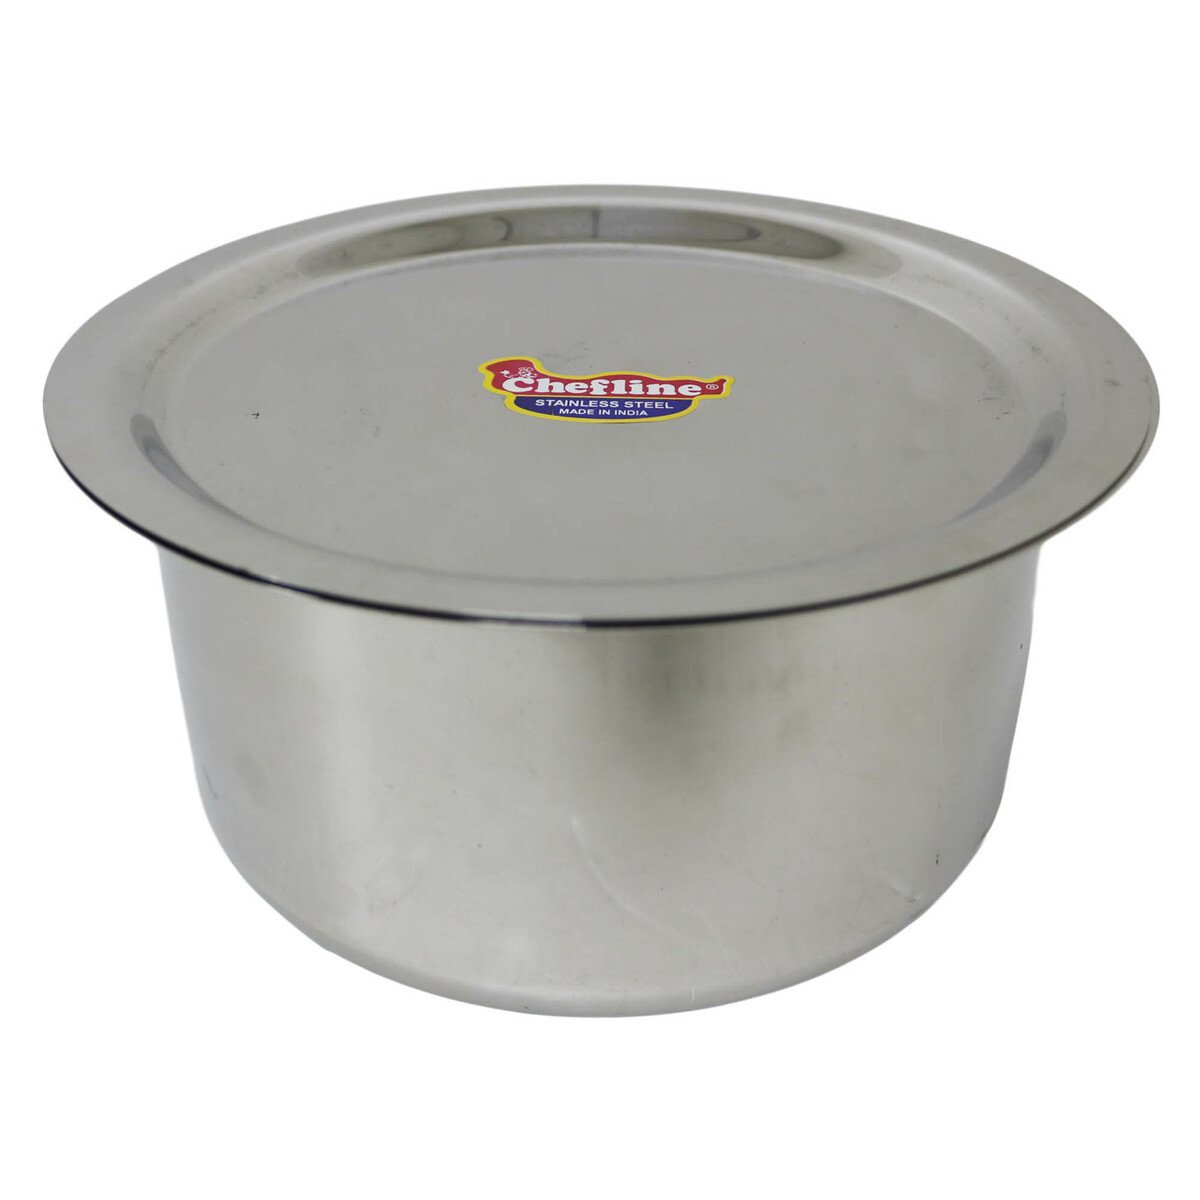 Chefline Top Set Stainless Steel With Lid 13cm